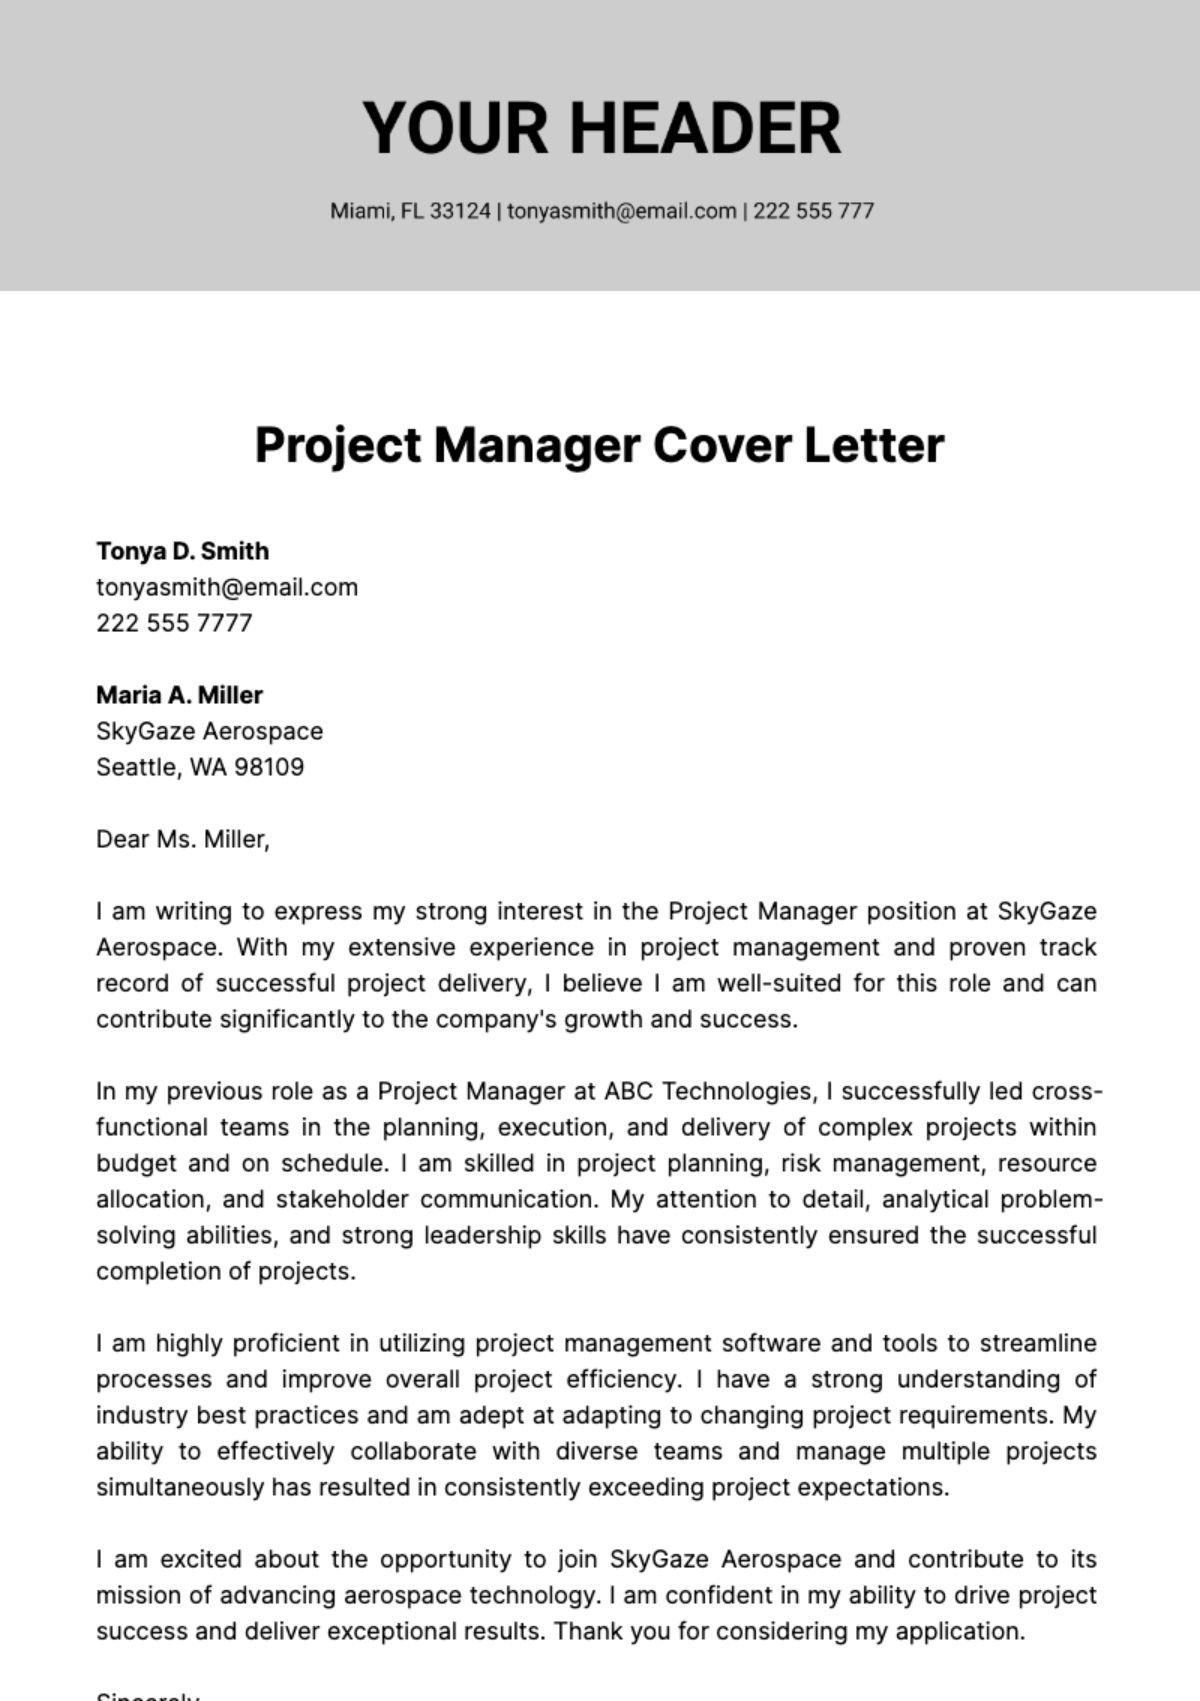 Free Project Manager Cover Letter  Template